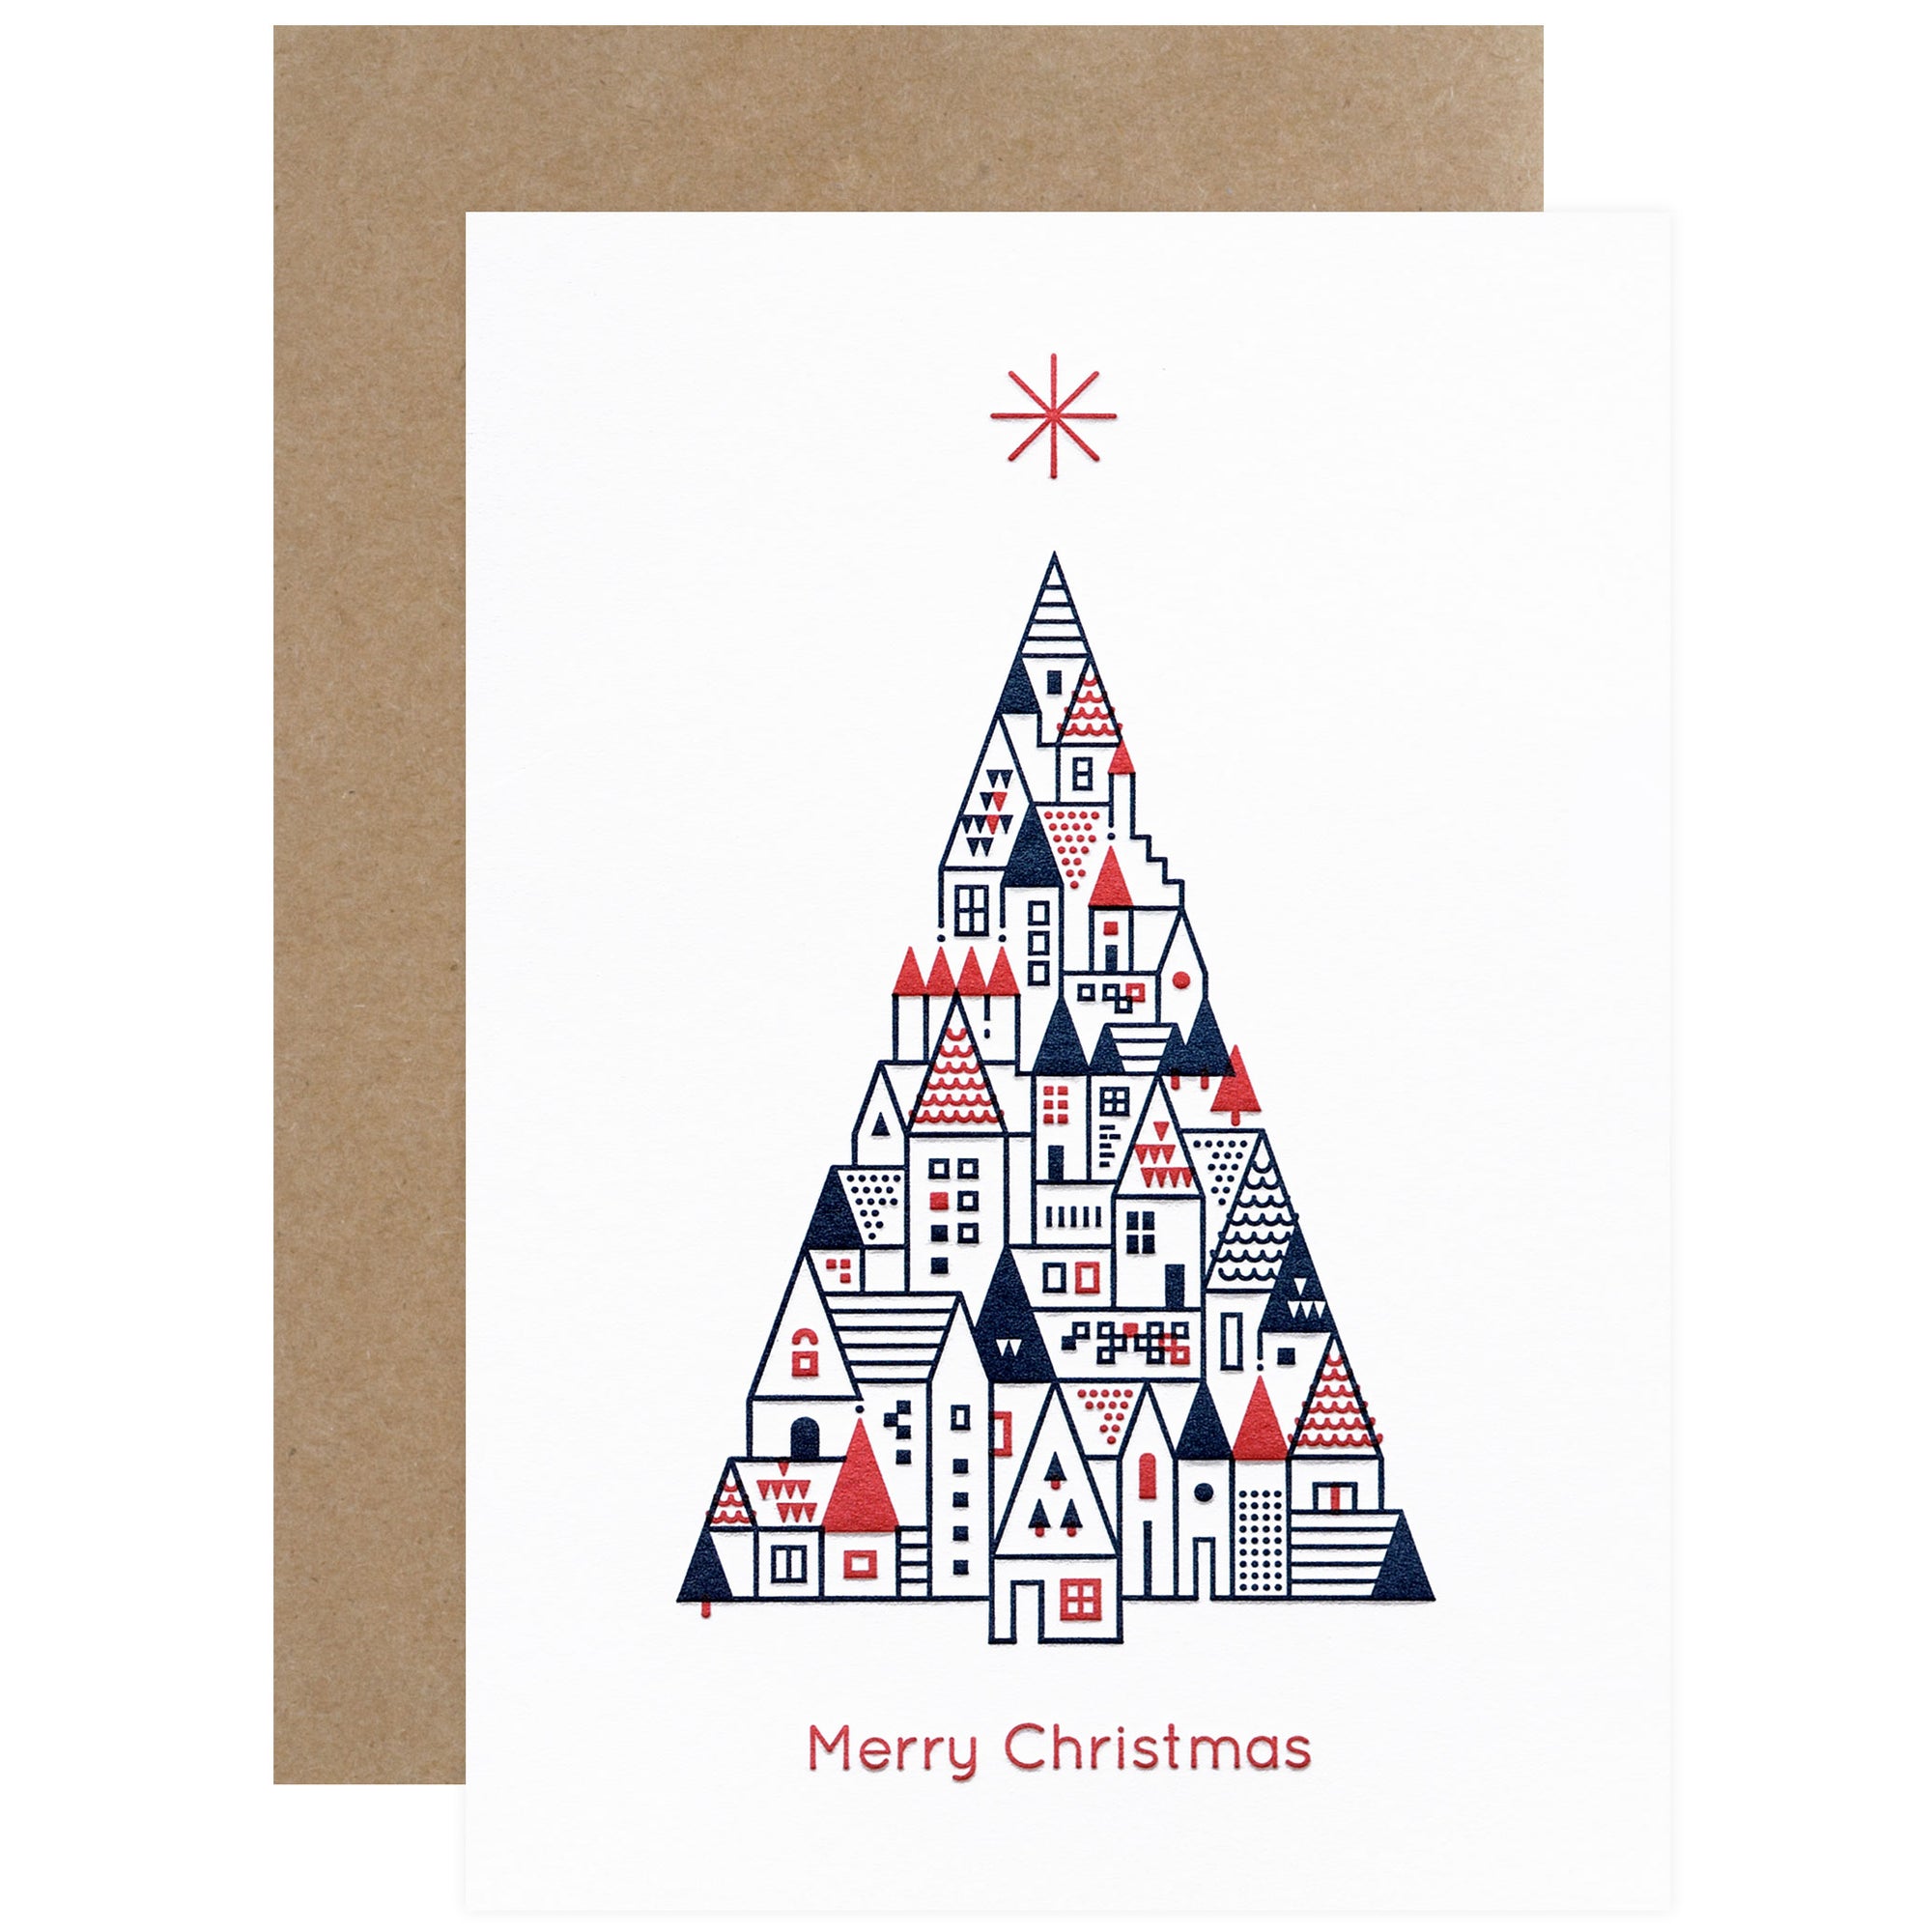 The City Works Letterpress Christmas Greeting Card 